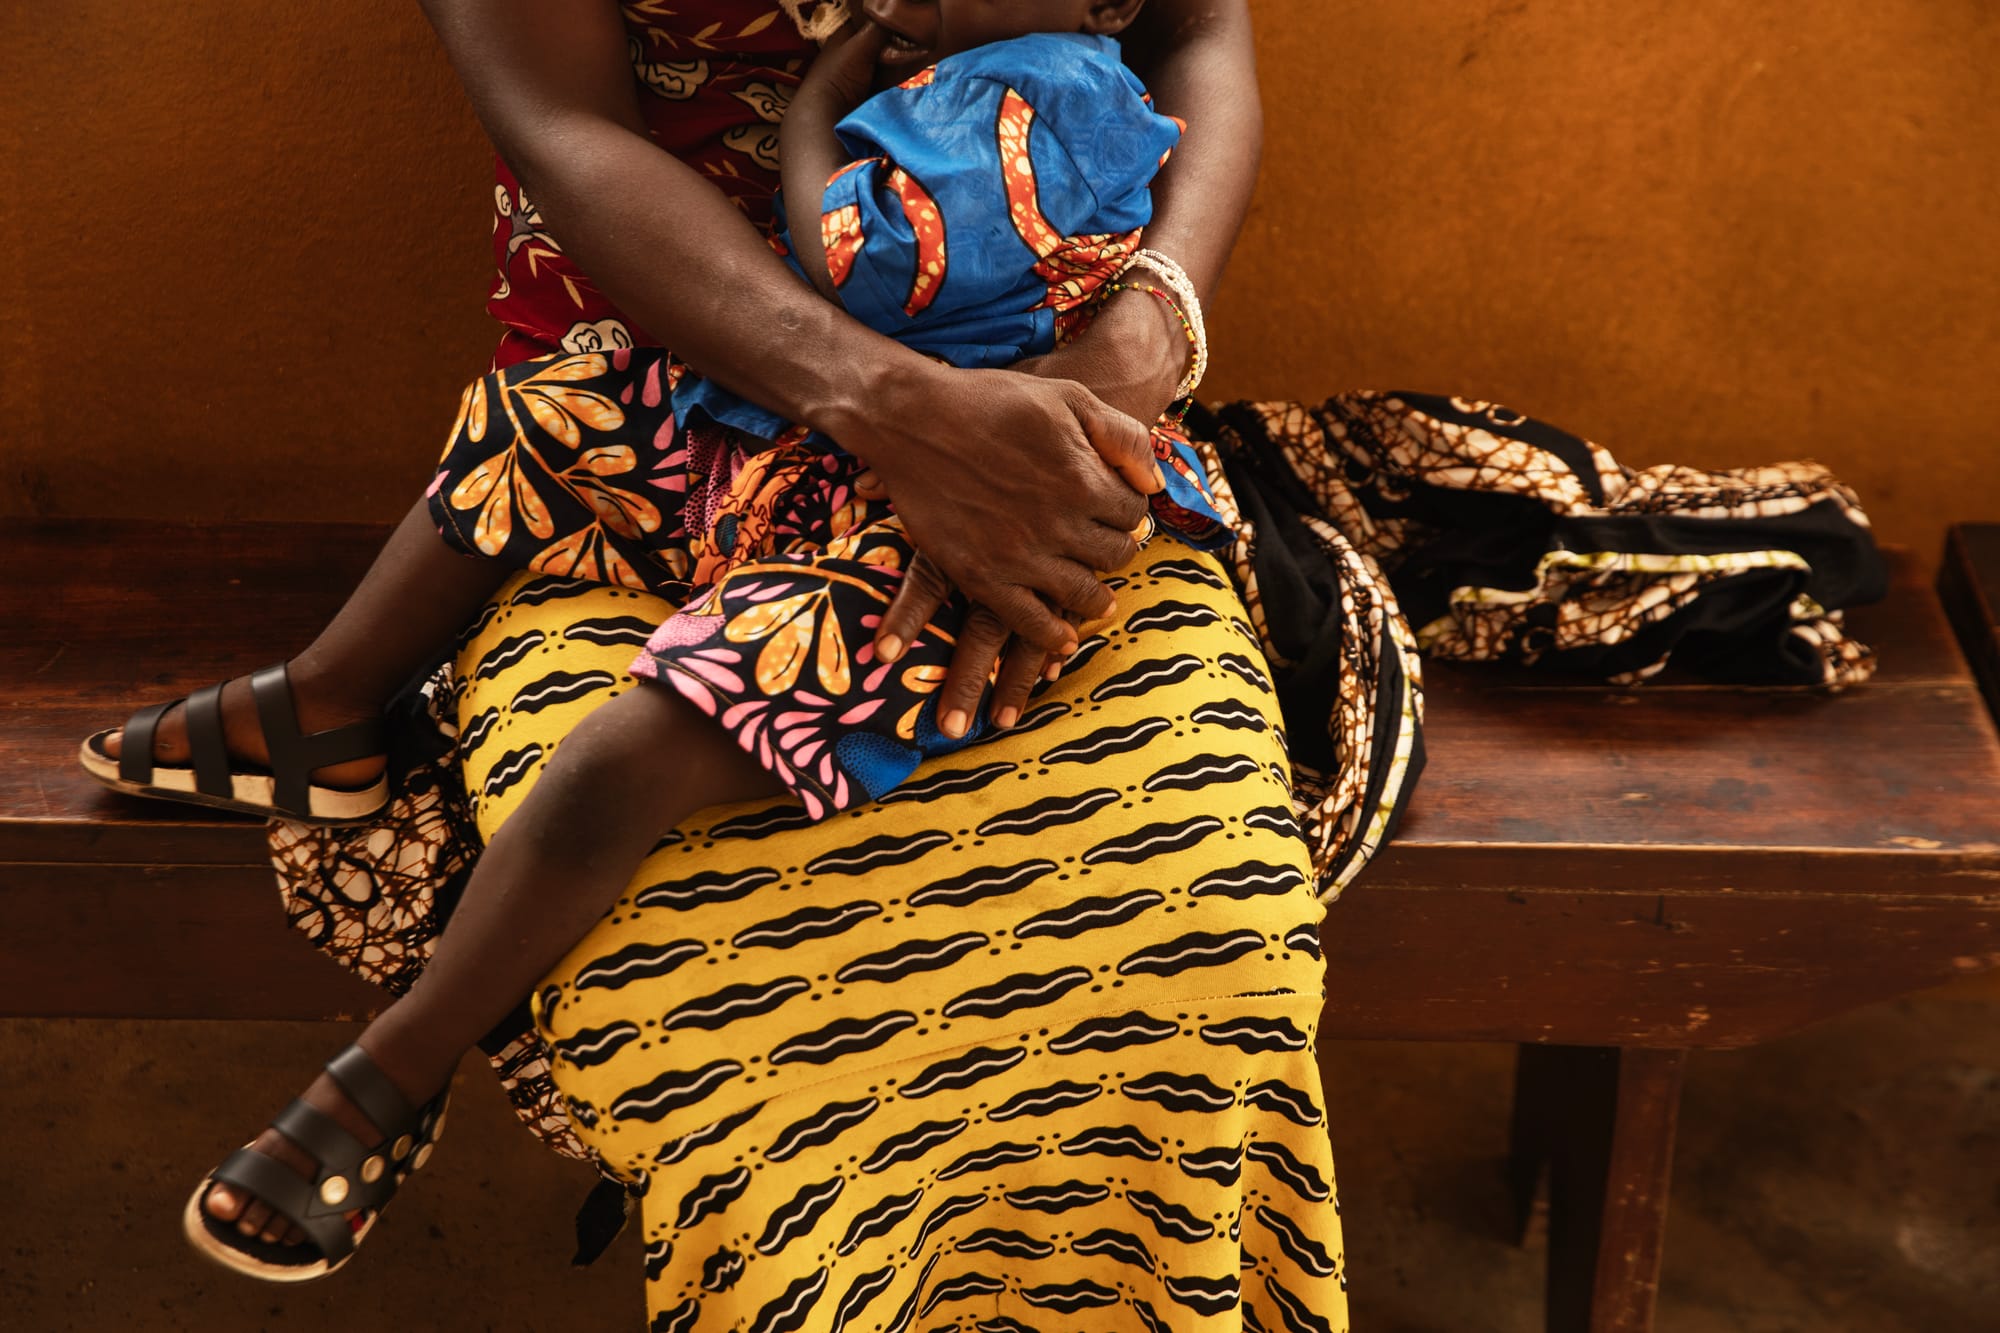 A mother with a yellow and black skirt holds her young child in her lap.